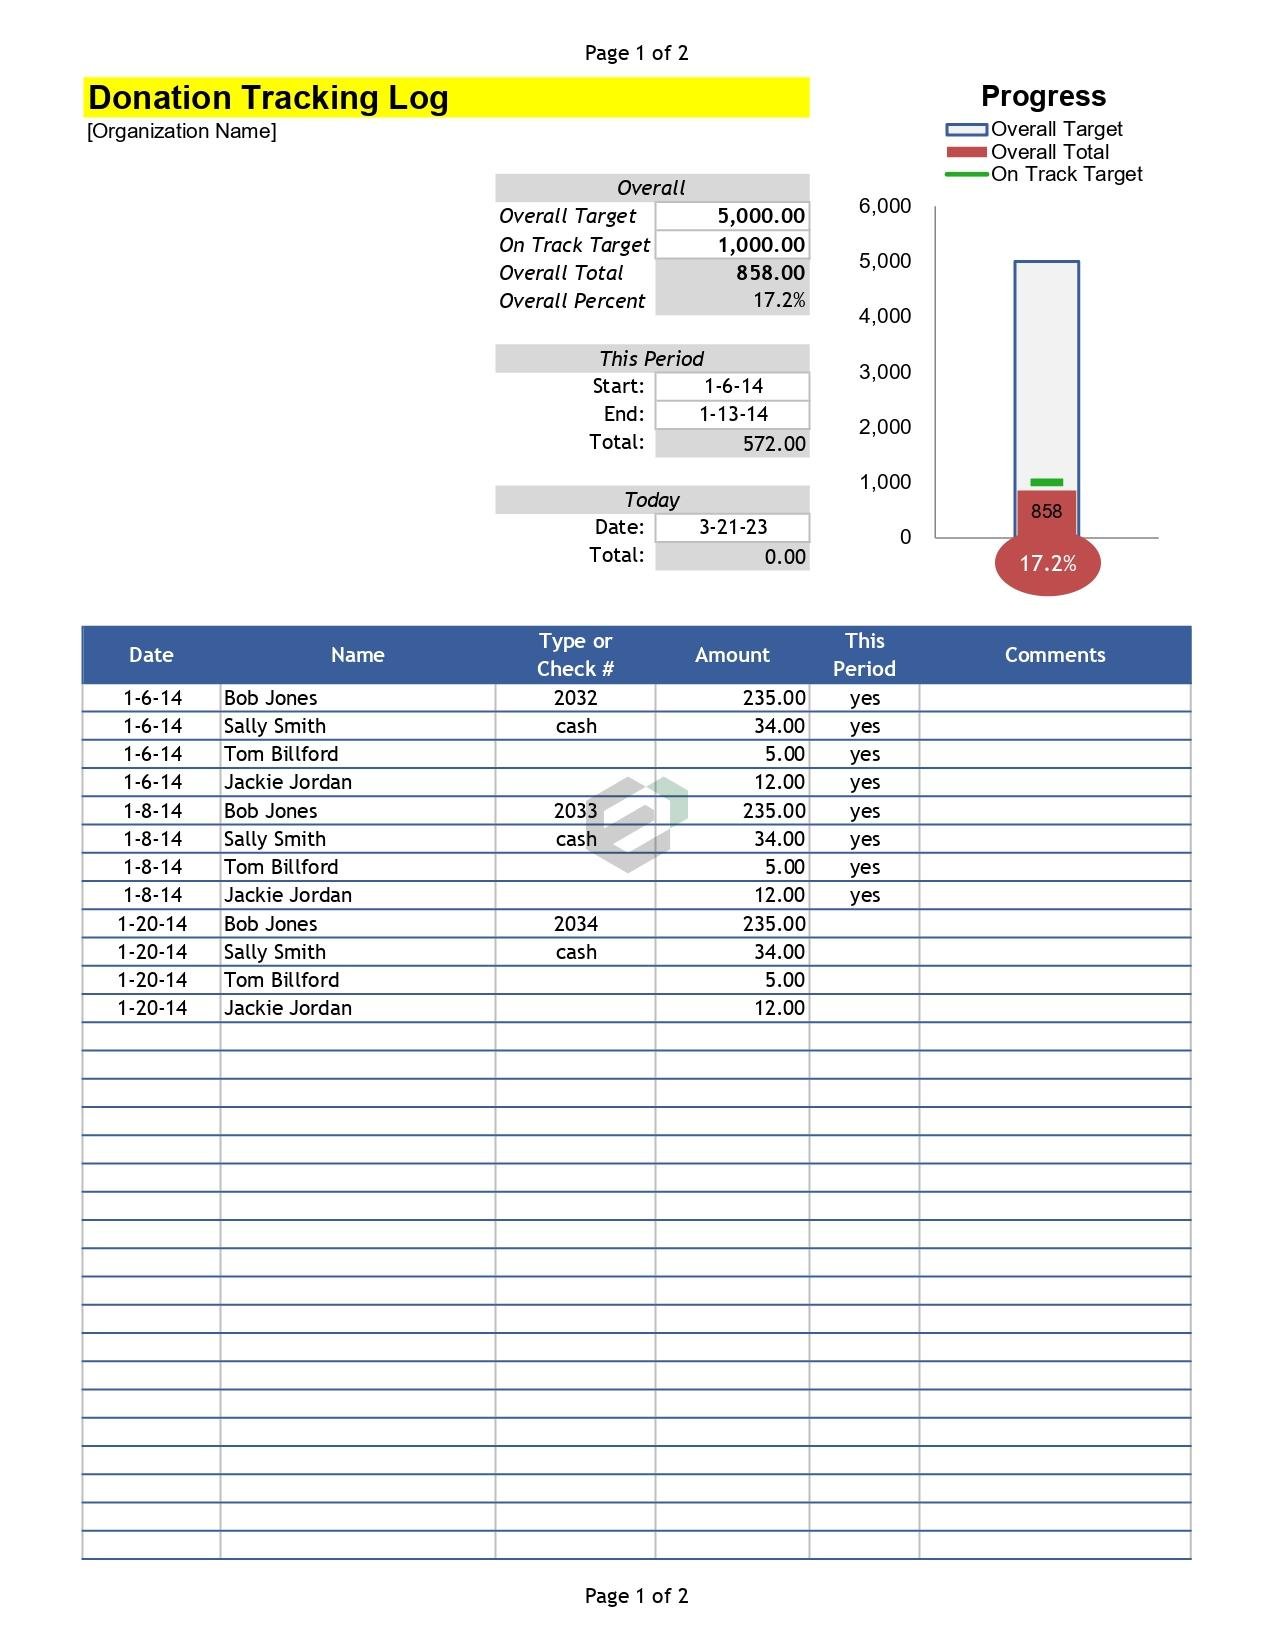 Donation tracker excel template. Use this template to track your donations, fundraiser goals and charitable inflows. Explore ExcelDownloads for more